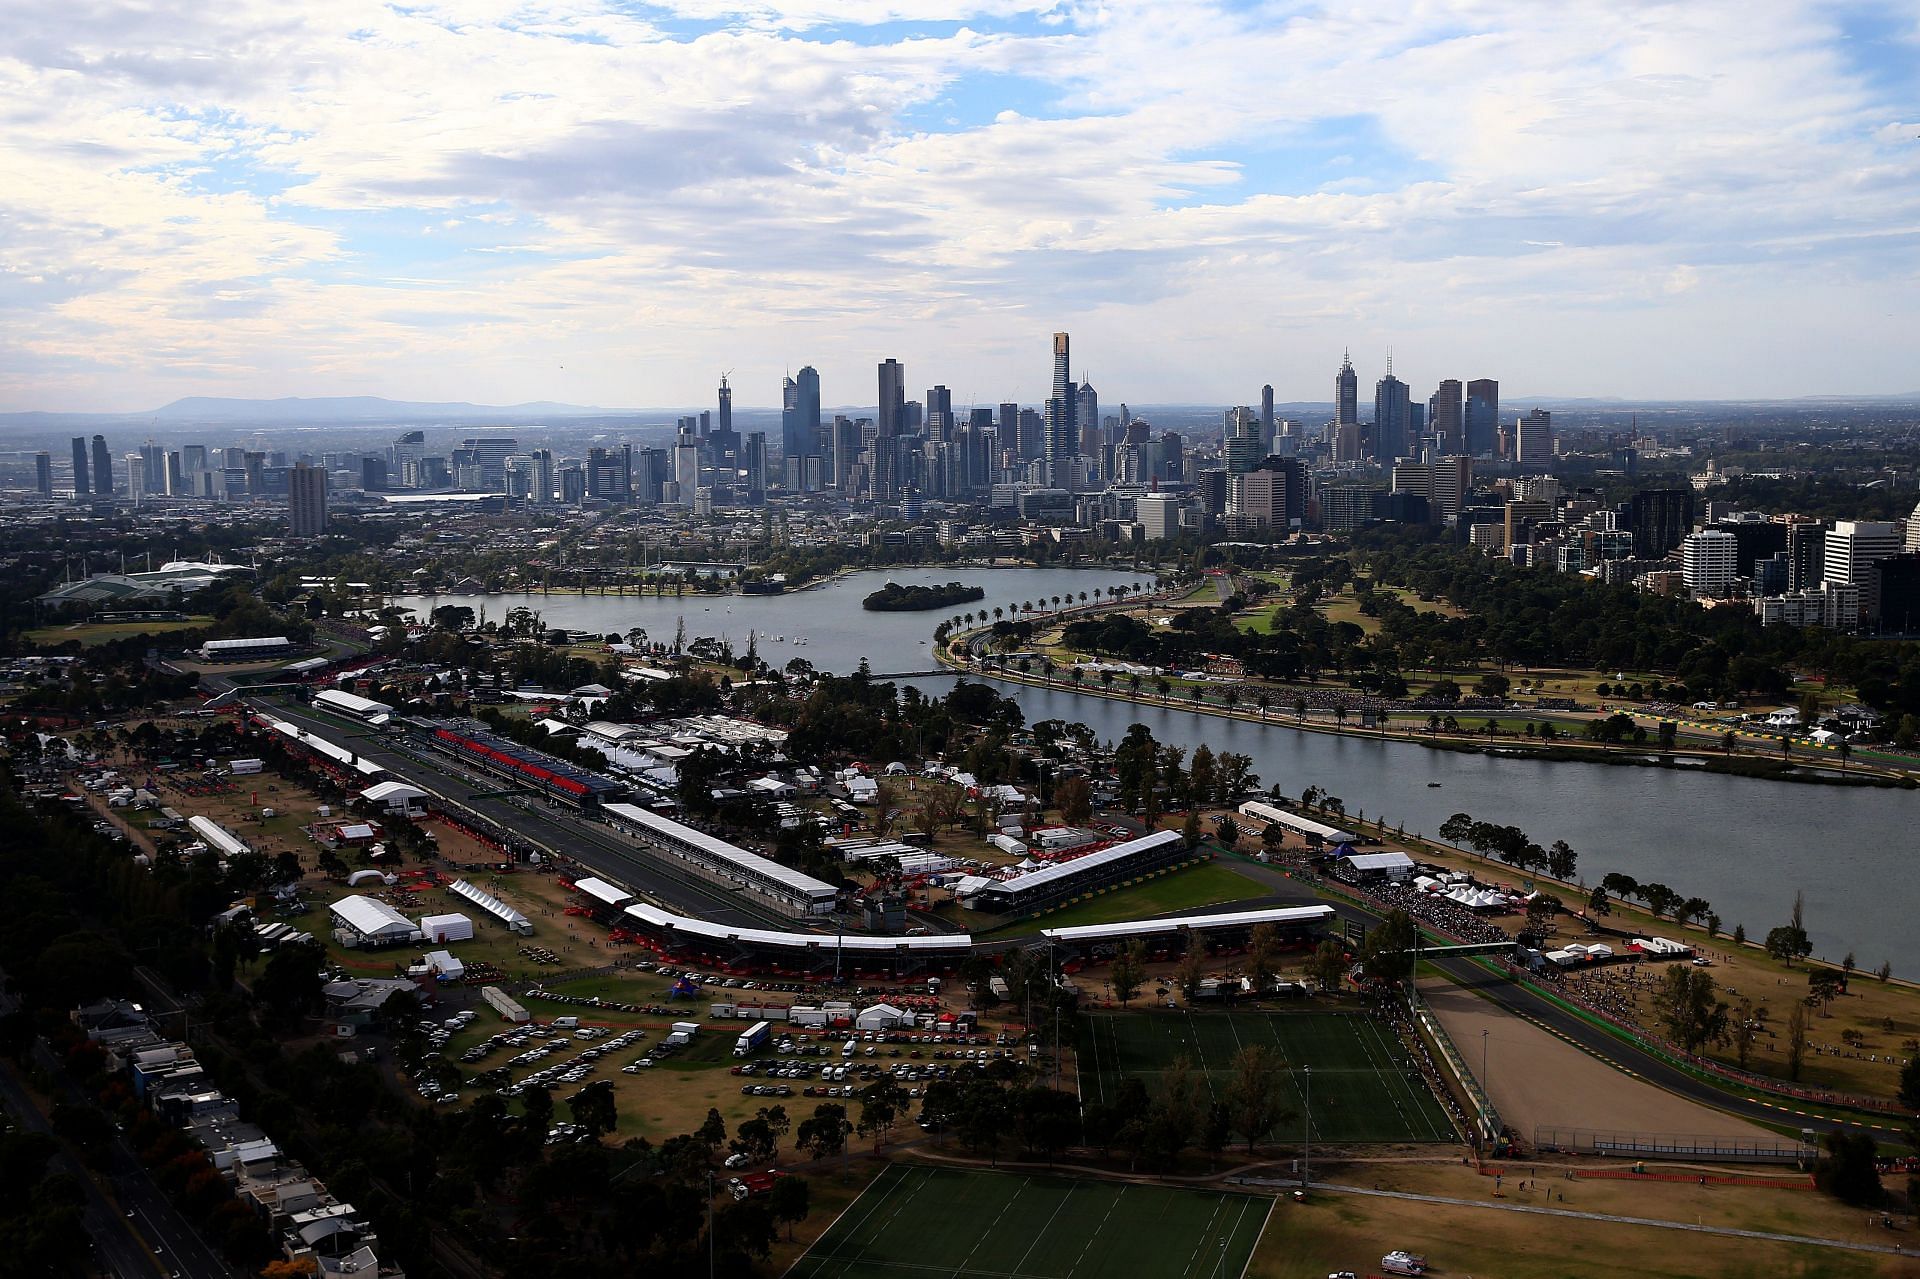 Australian F1 Grand Prix - Qualifying - An ariel view of the iconic track.